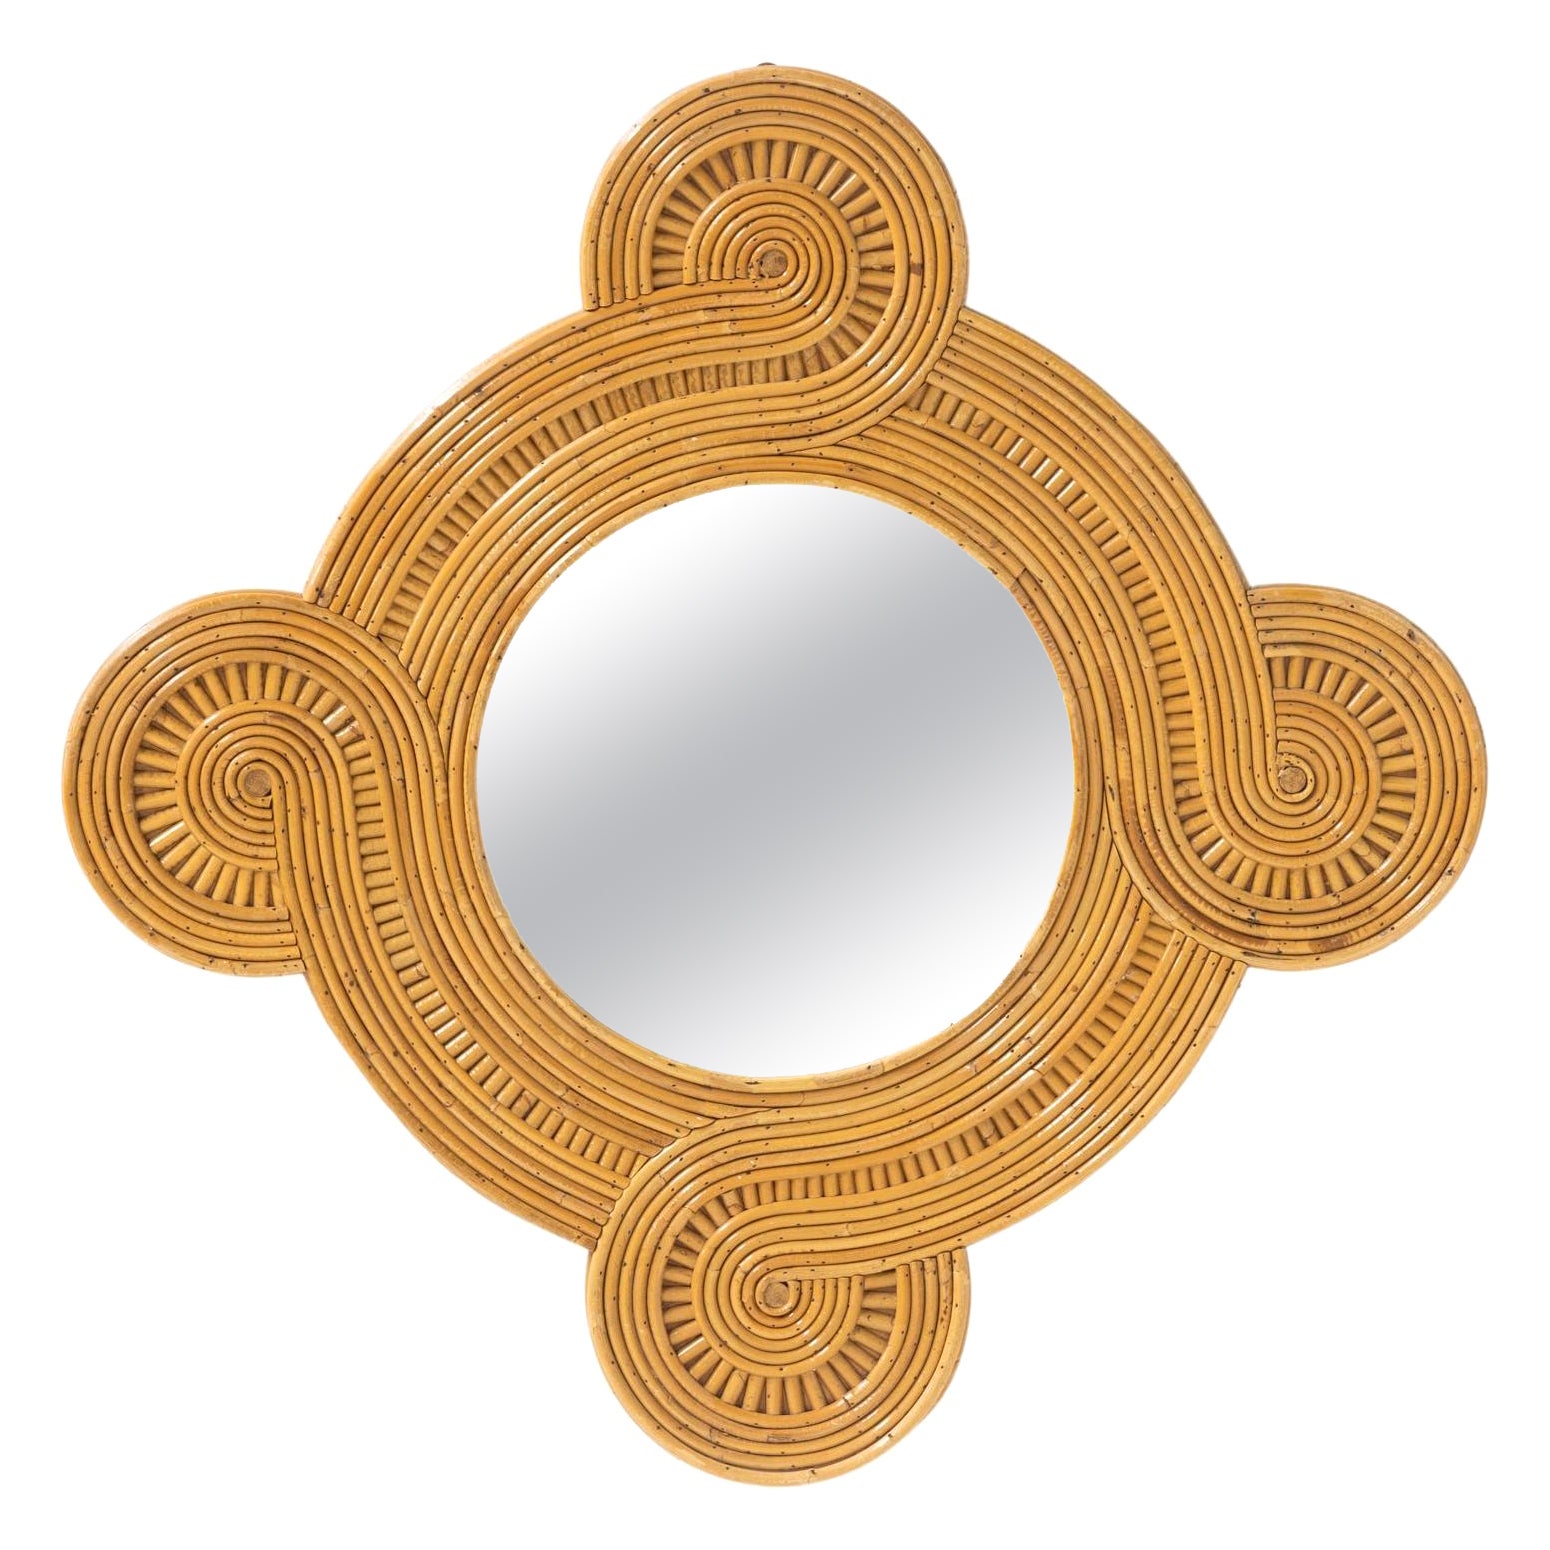 Bamboo Tropicalist Mirror by Vivai del Sud, 1960s For Sale